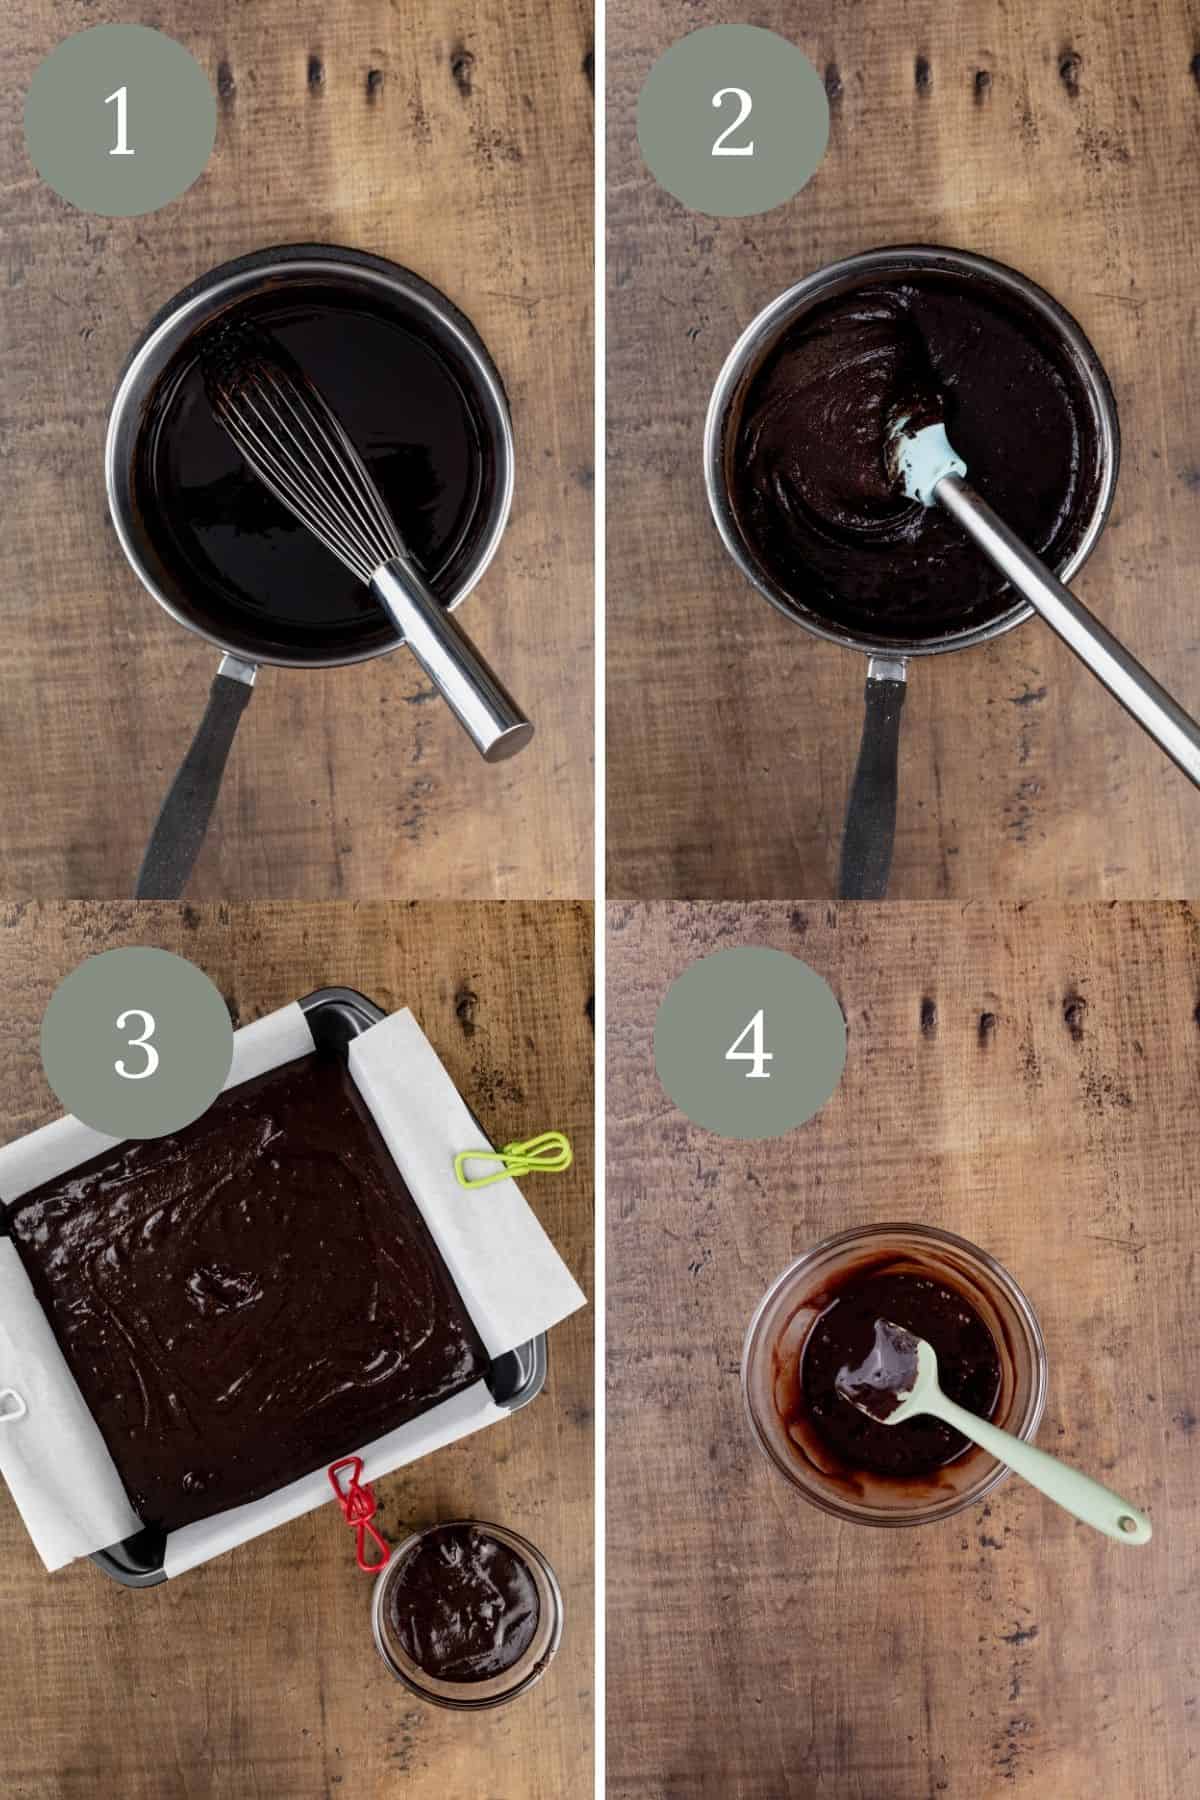 Collage of 4 images showing the making of the brownie batter and putting it into a pan.